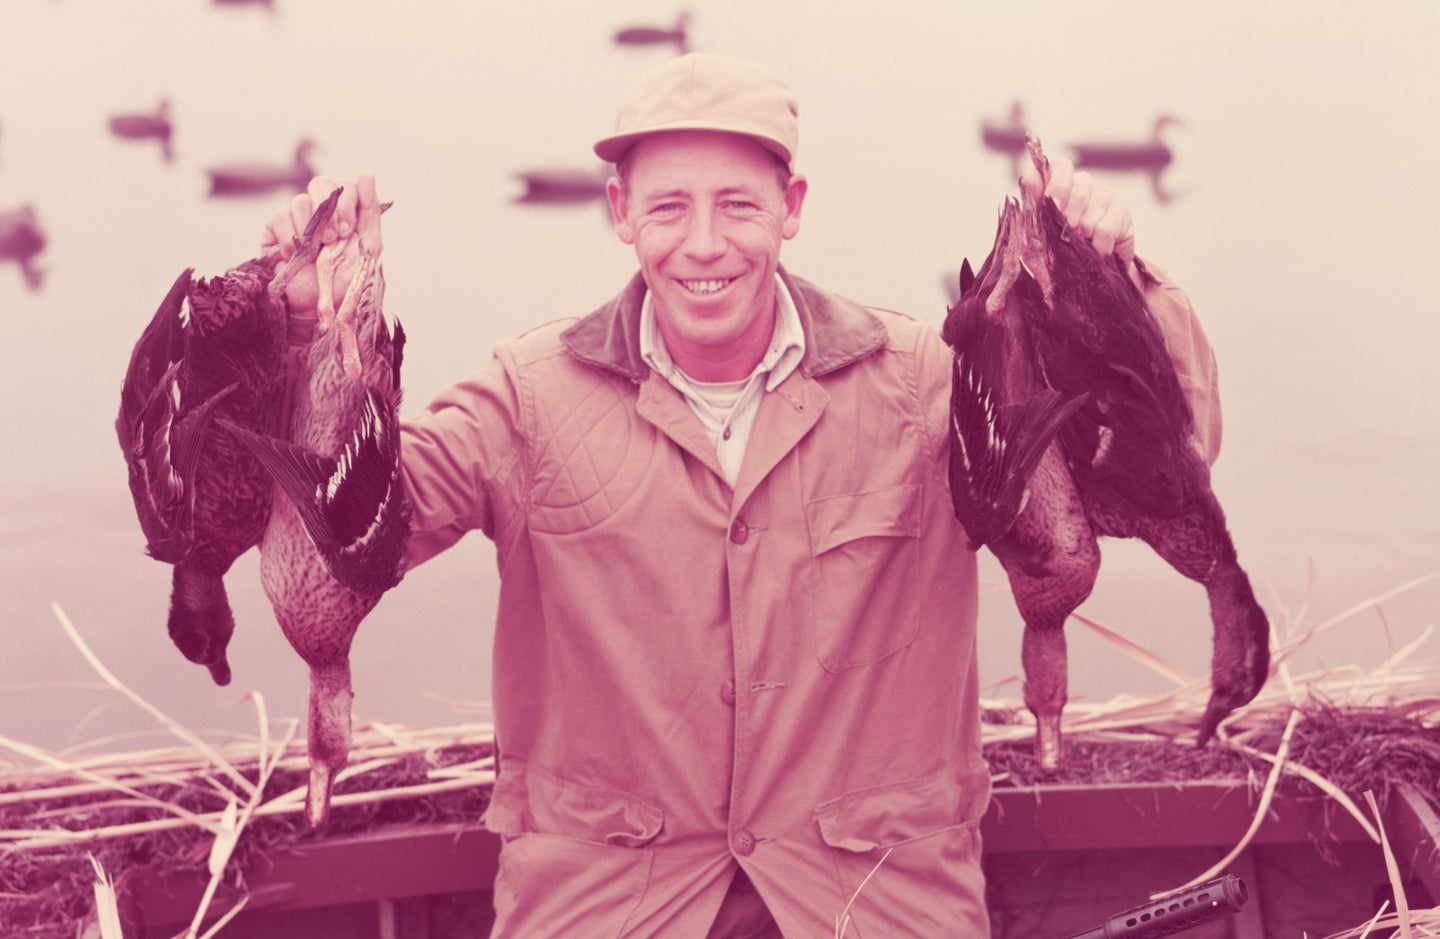 Vintage hunting photo of man with dead ducks.